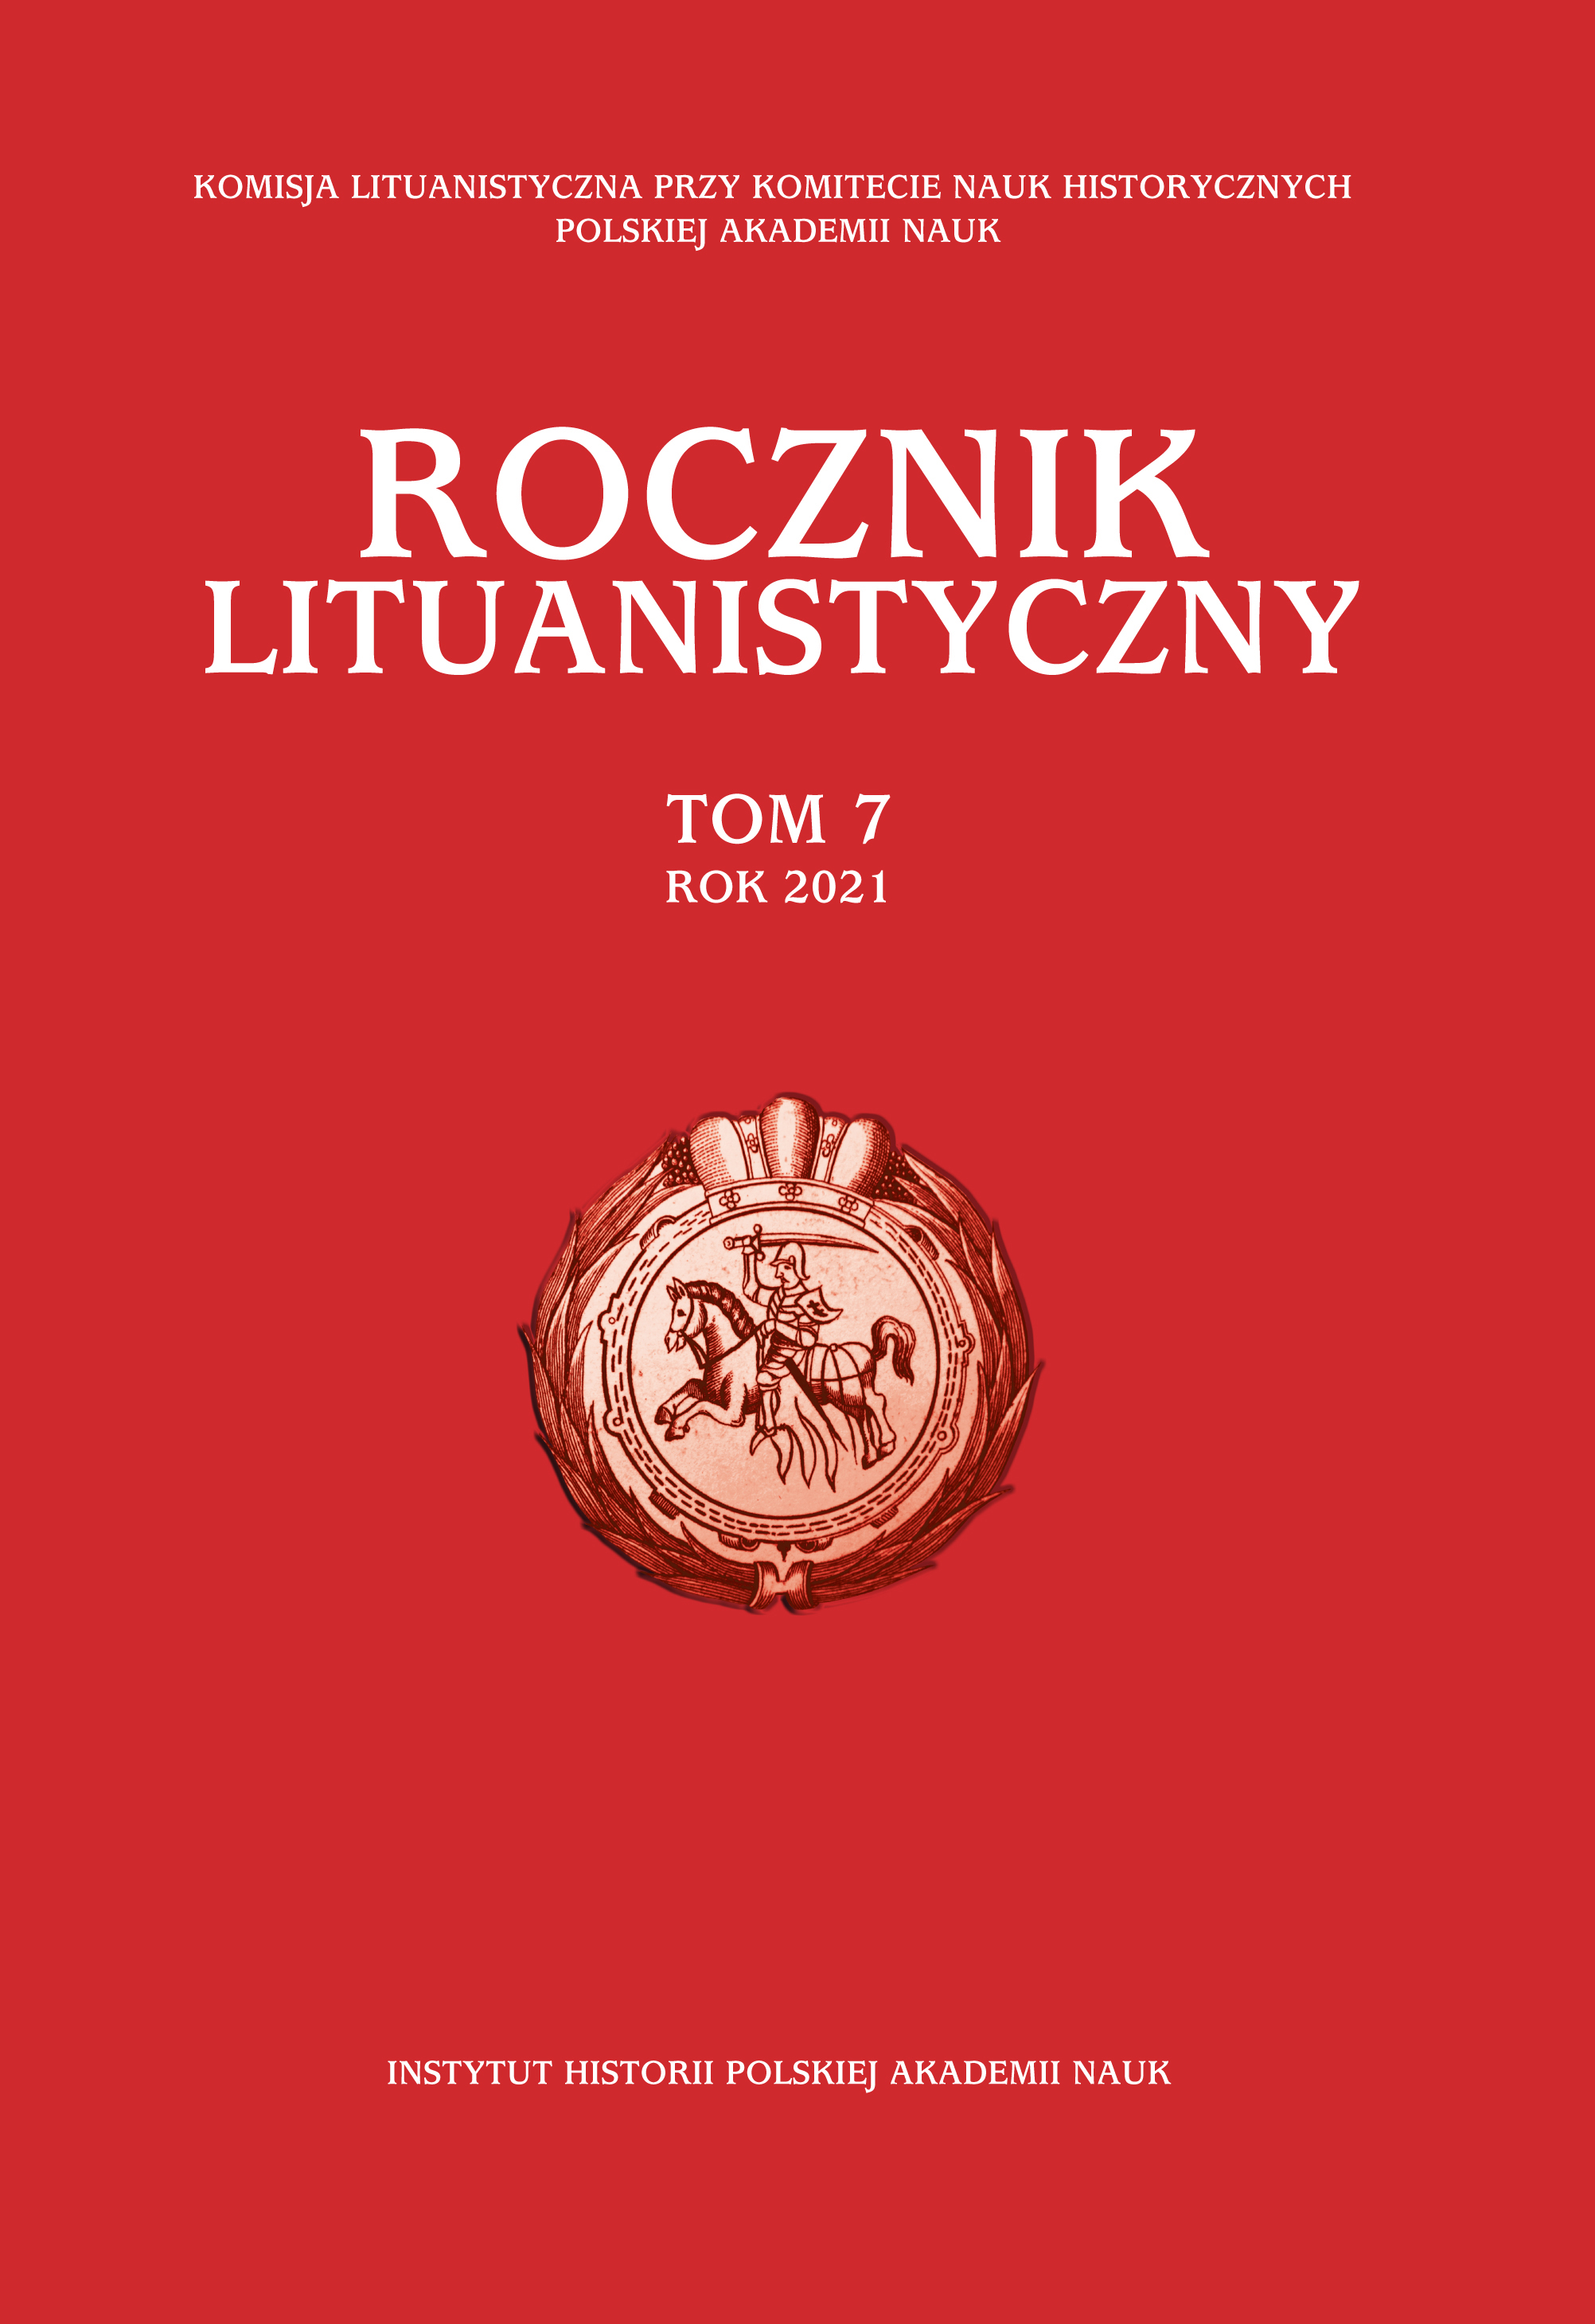 List of Deputies from the Grand Duchy of Lithuania and Their Attitudes at the 1735 Pacification Sejm Cover Image